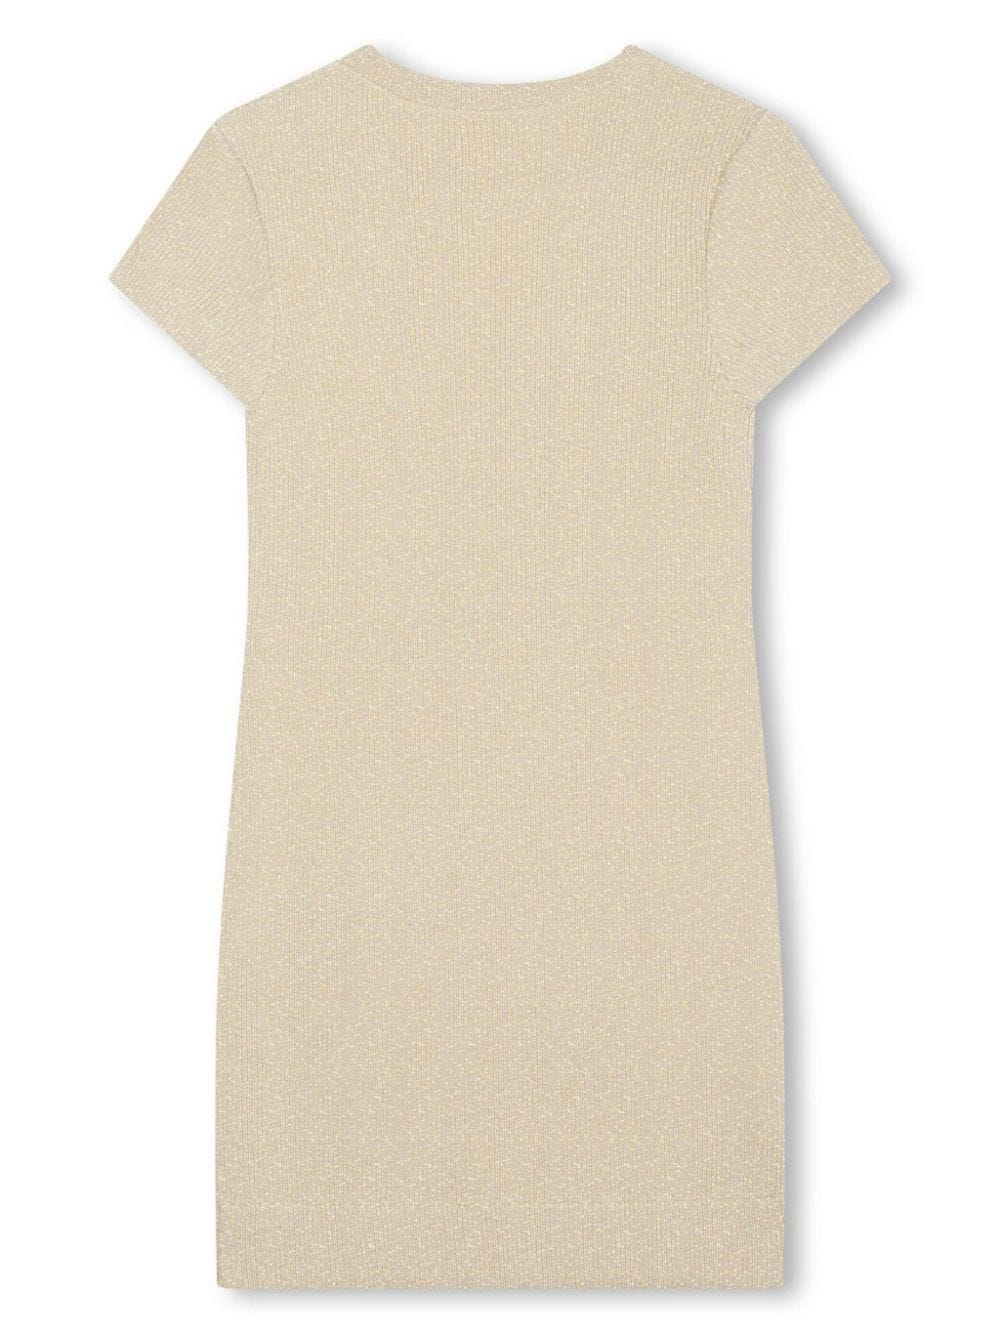 Beige dress for girls with logo plaque